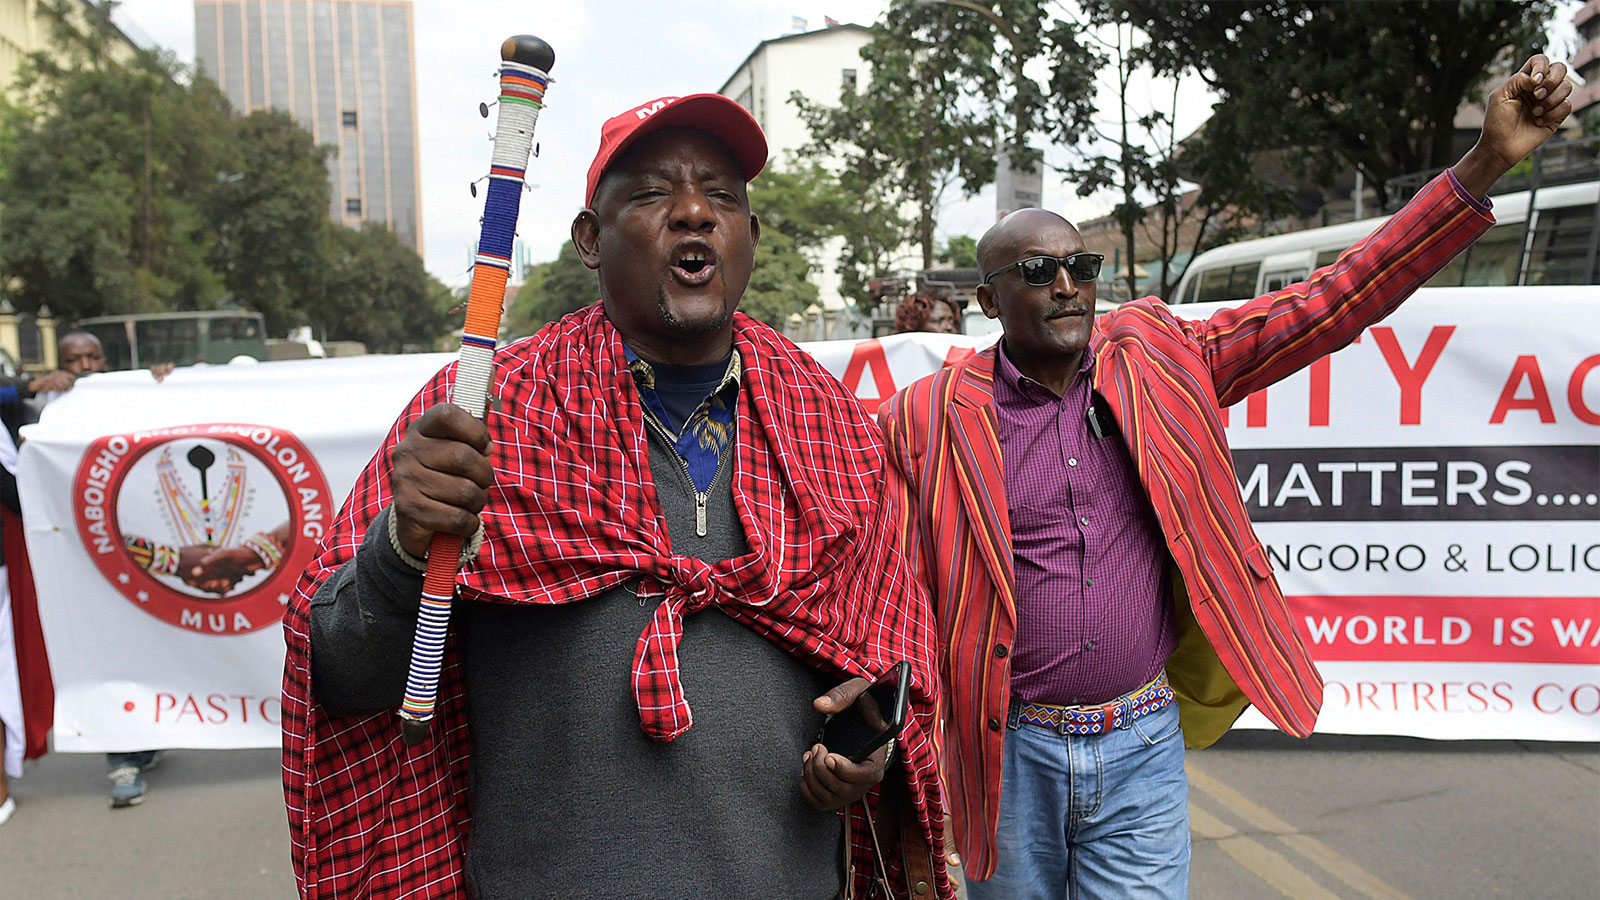 Two people protesting the forceful eviction of the Loliondo Ngorongoro Maa community by the republic of Tanzania; a banner is held by others behind them